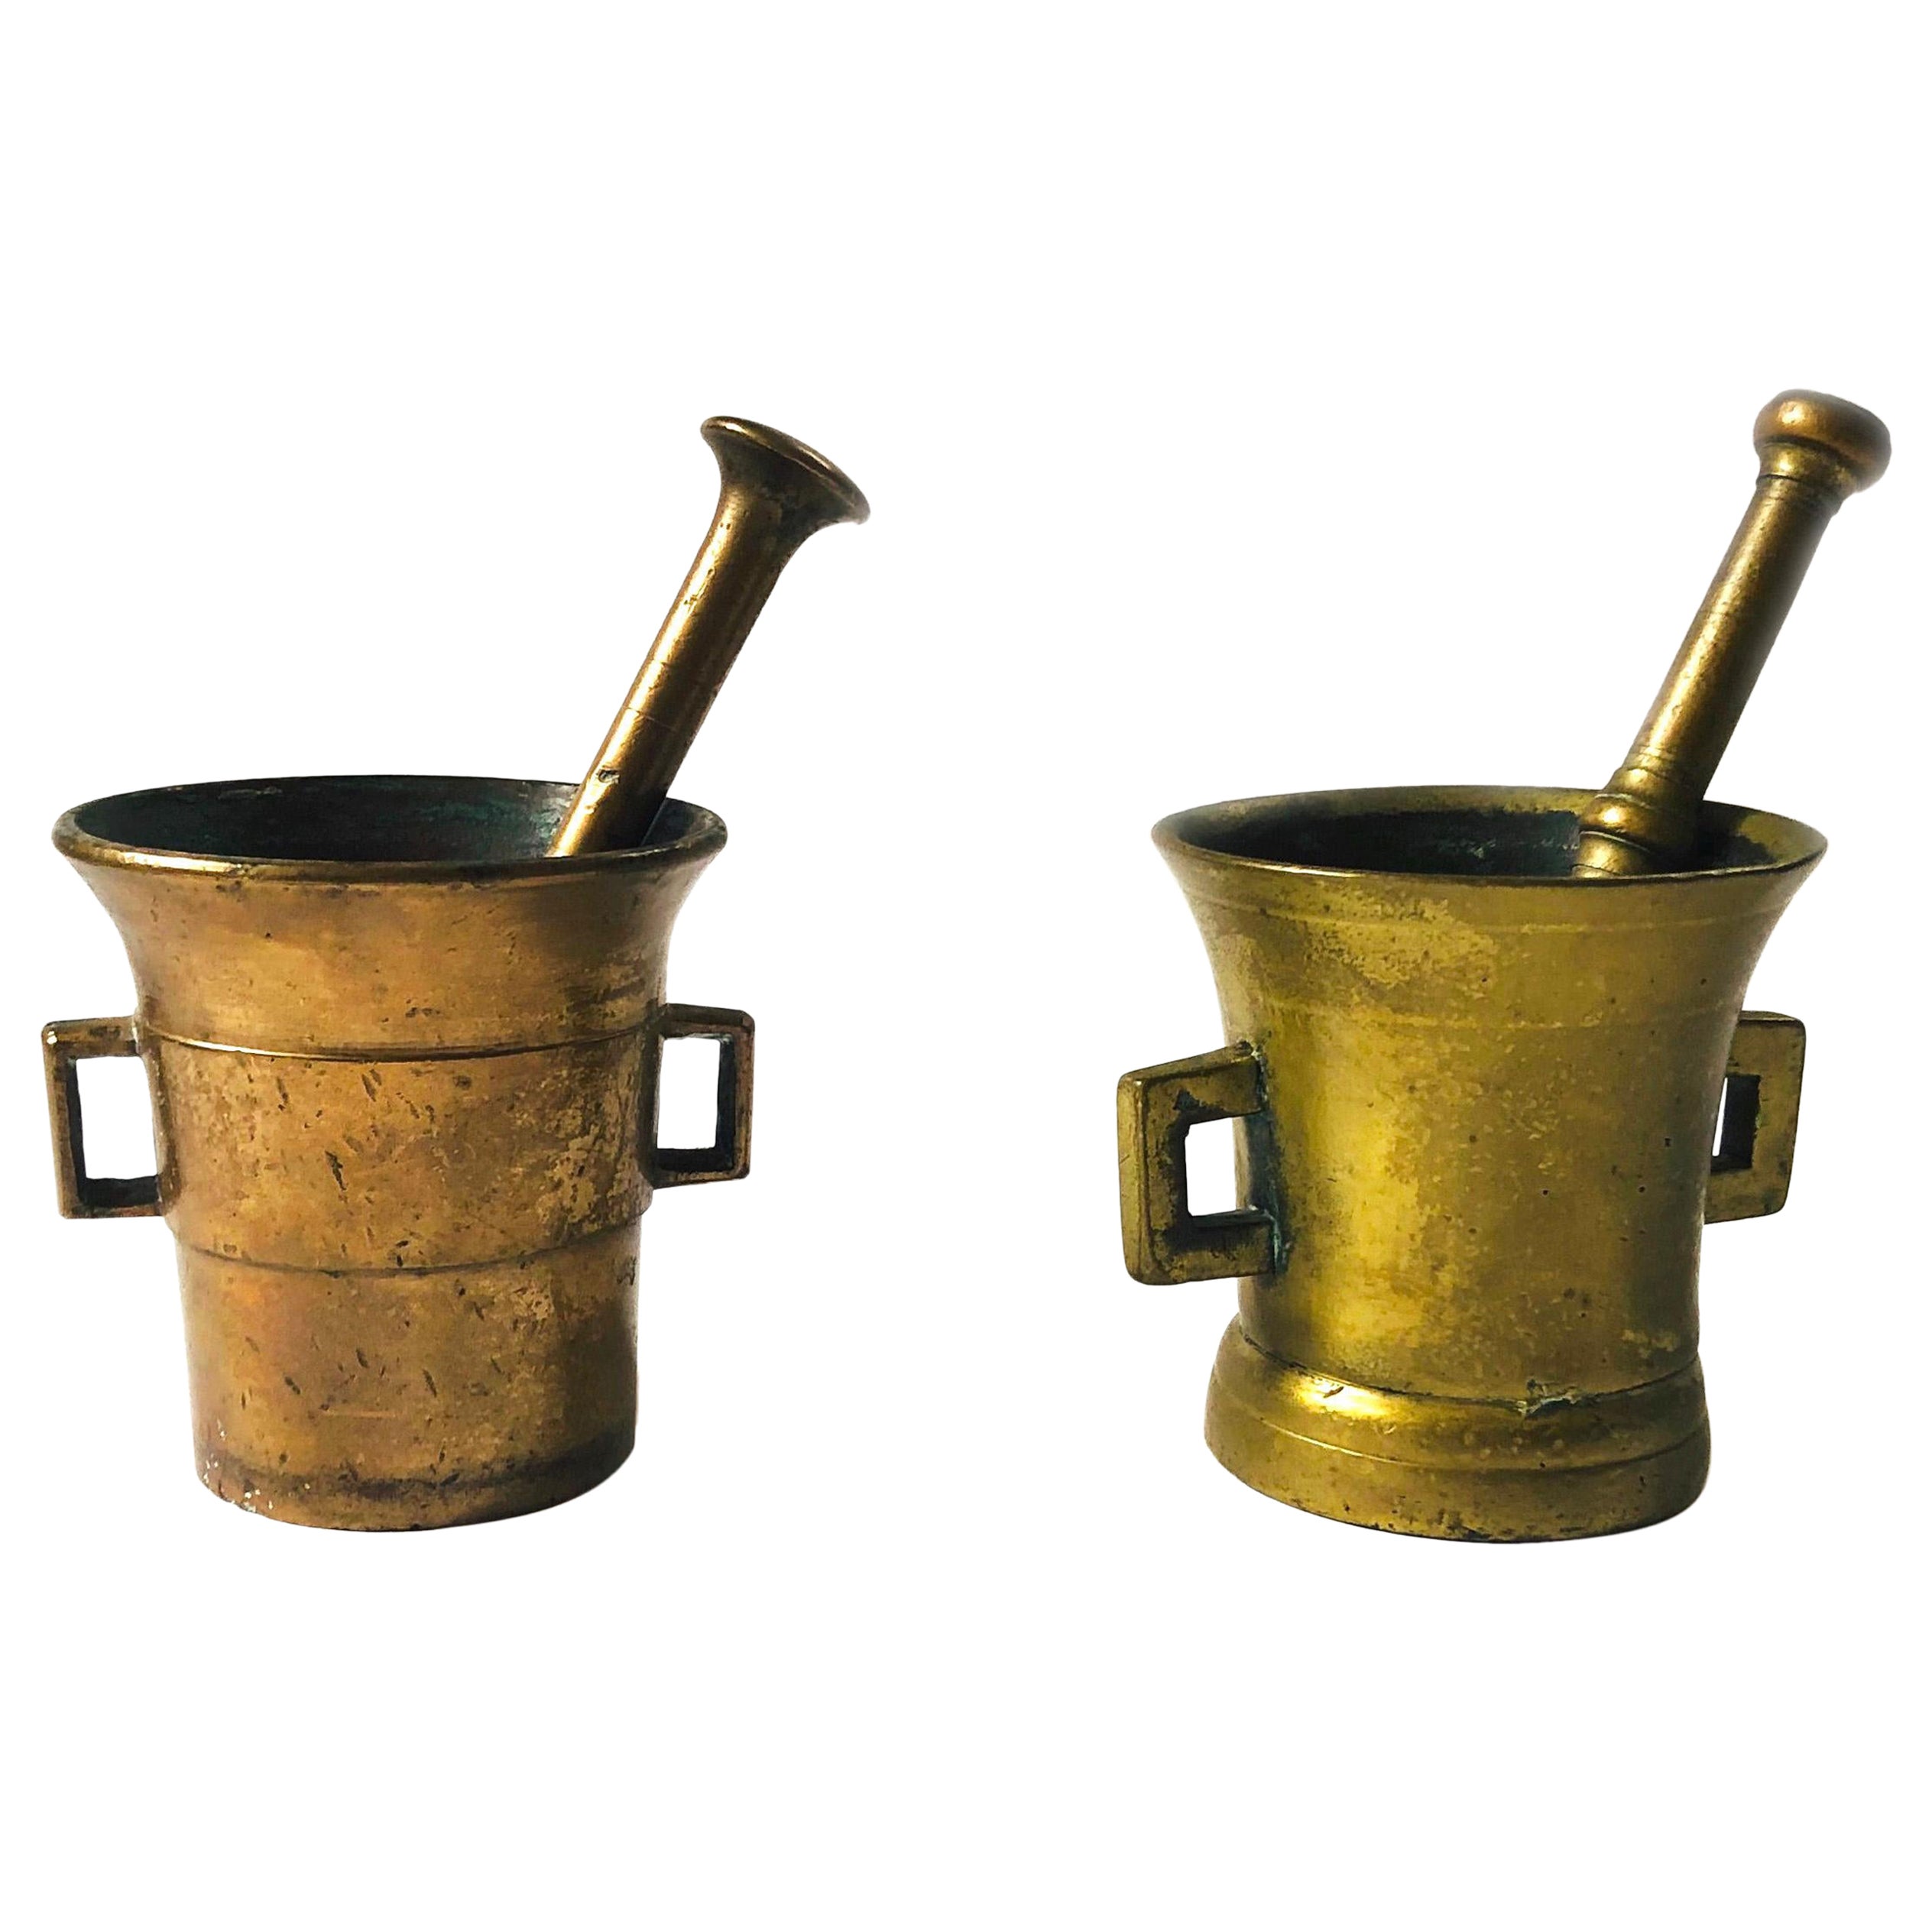 Small Antique 1900s Solid Brass Apothecary Mortars and Pestles - Set of 2 For Sale